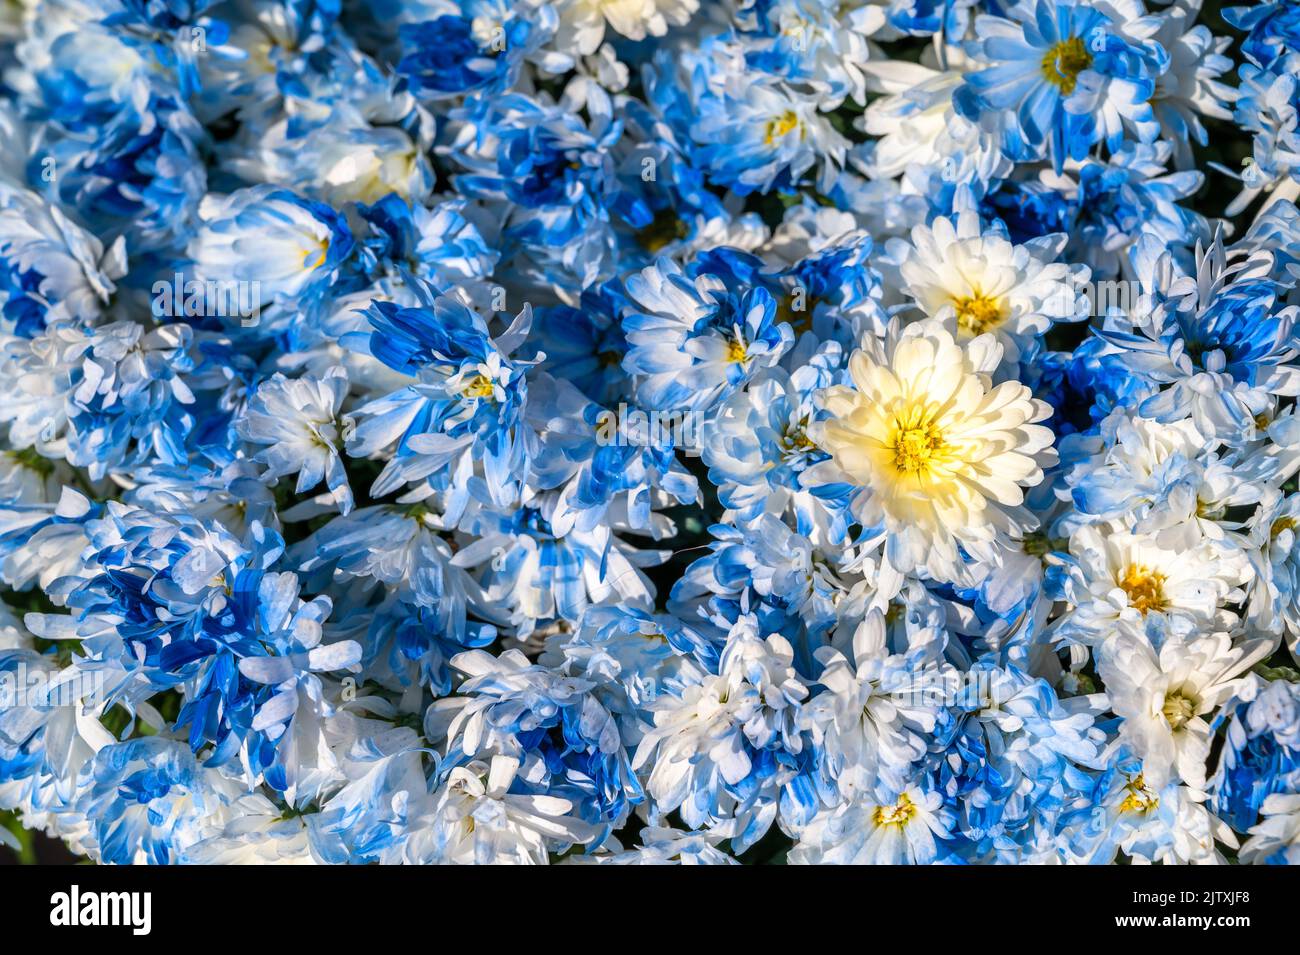 Blue winter asters as a colorful decoration in the garden Stock Photo